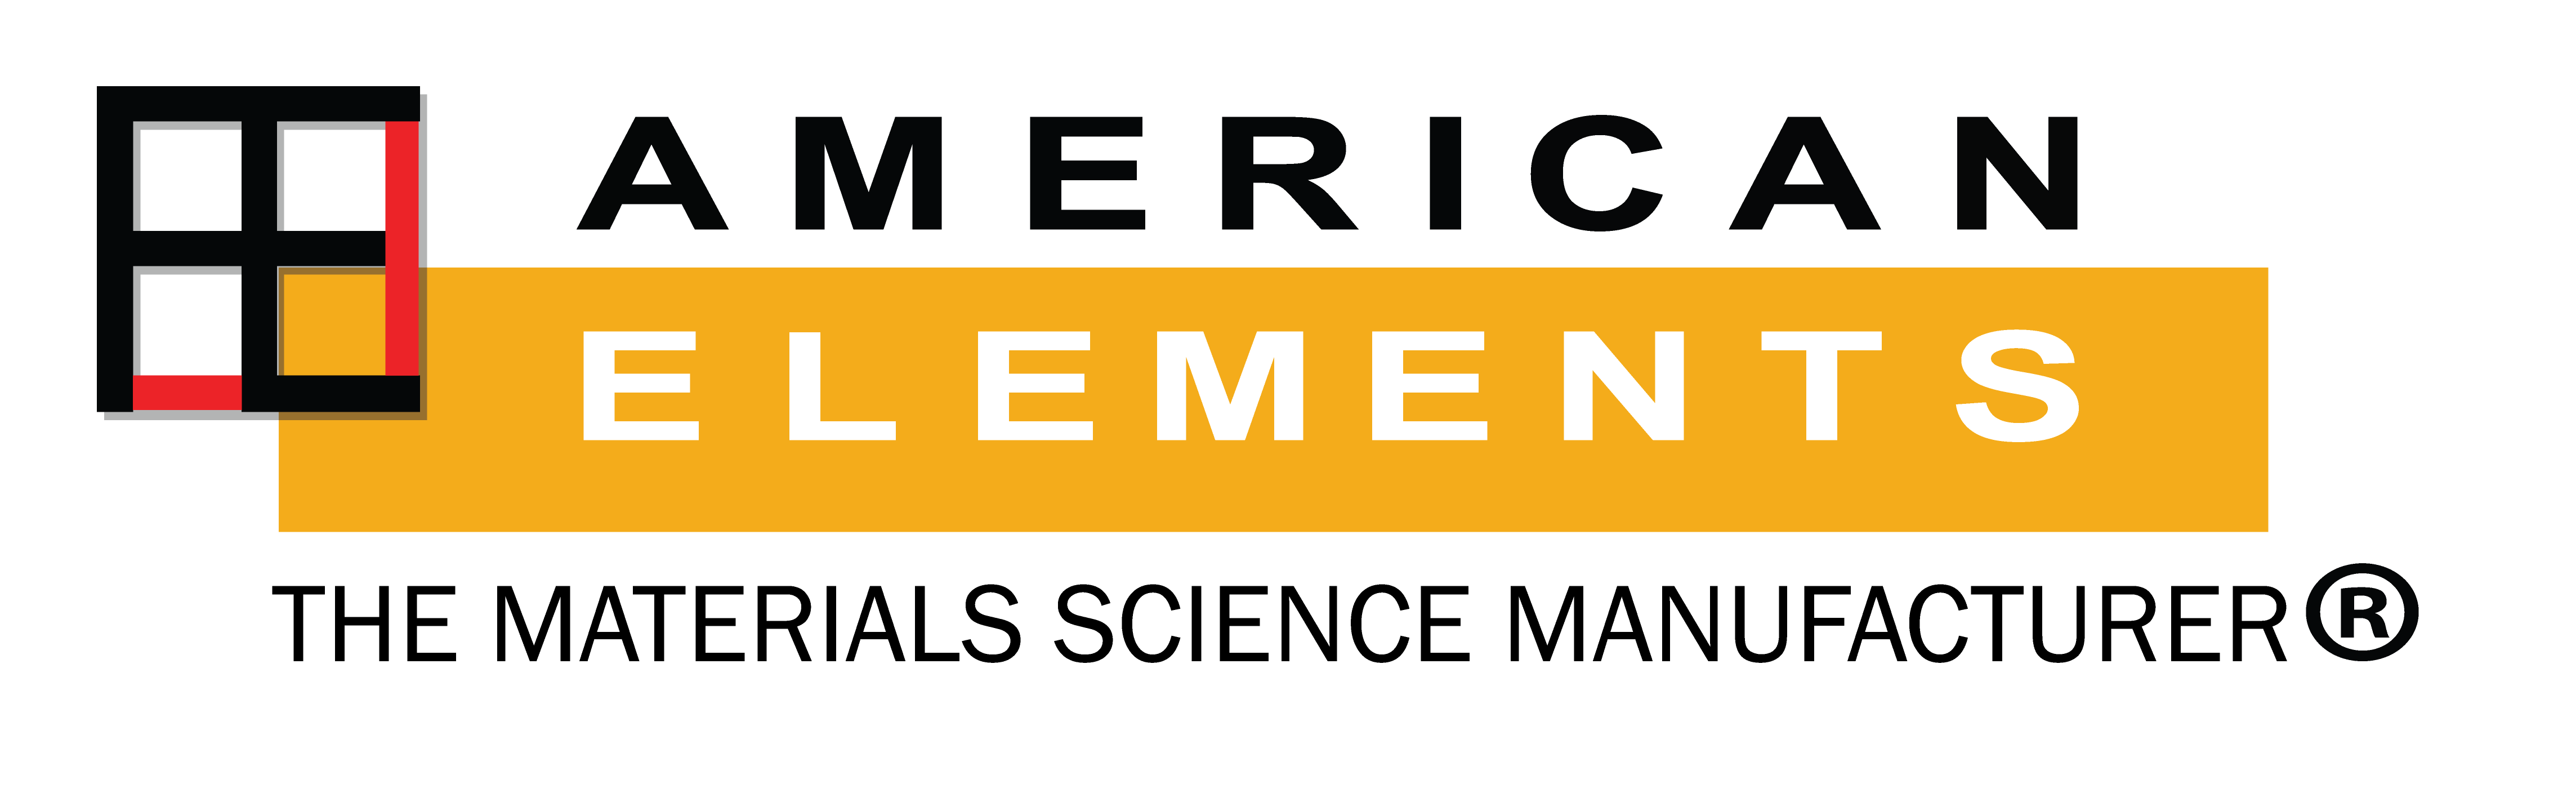 American Elements, global manufacturer of high purity metals, substrates, laser crystals, advanced materials for semiconductors, precursors, optoelectronics, & LEDs